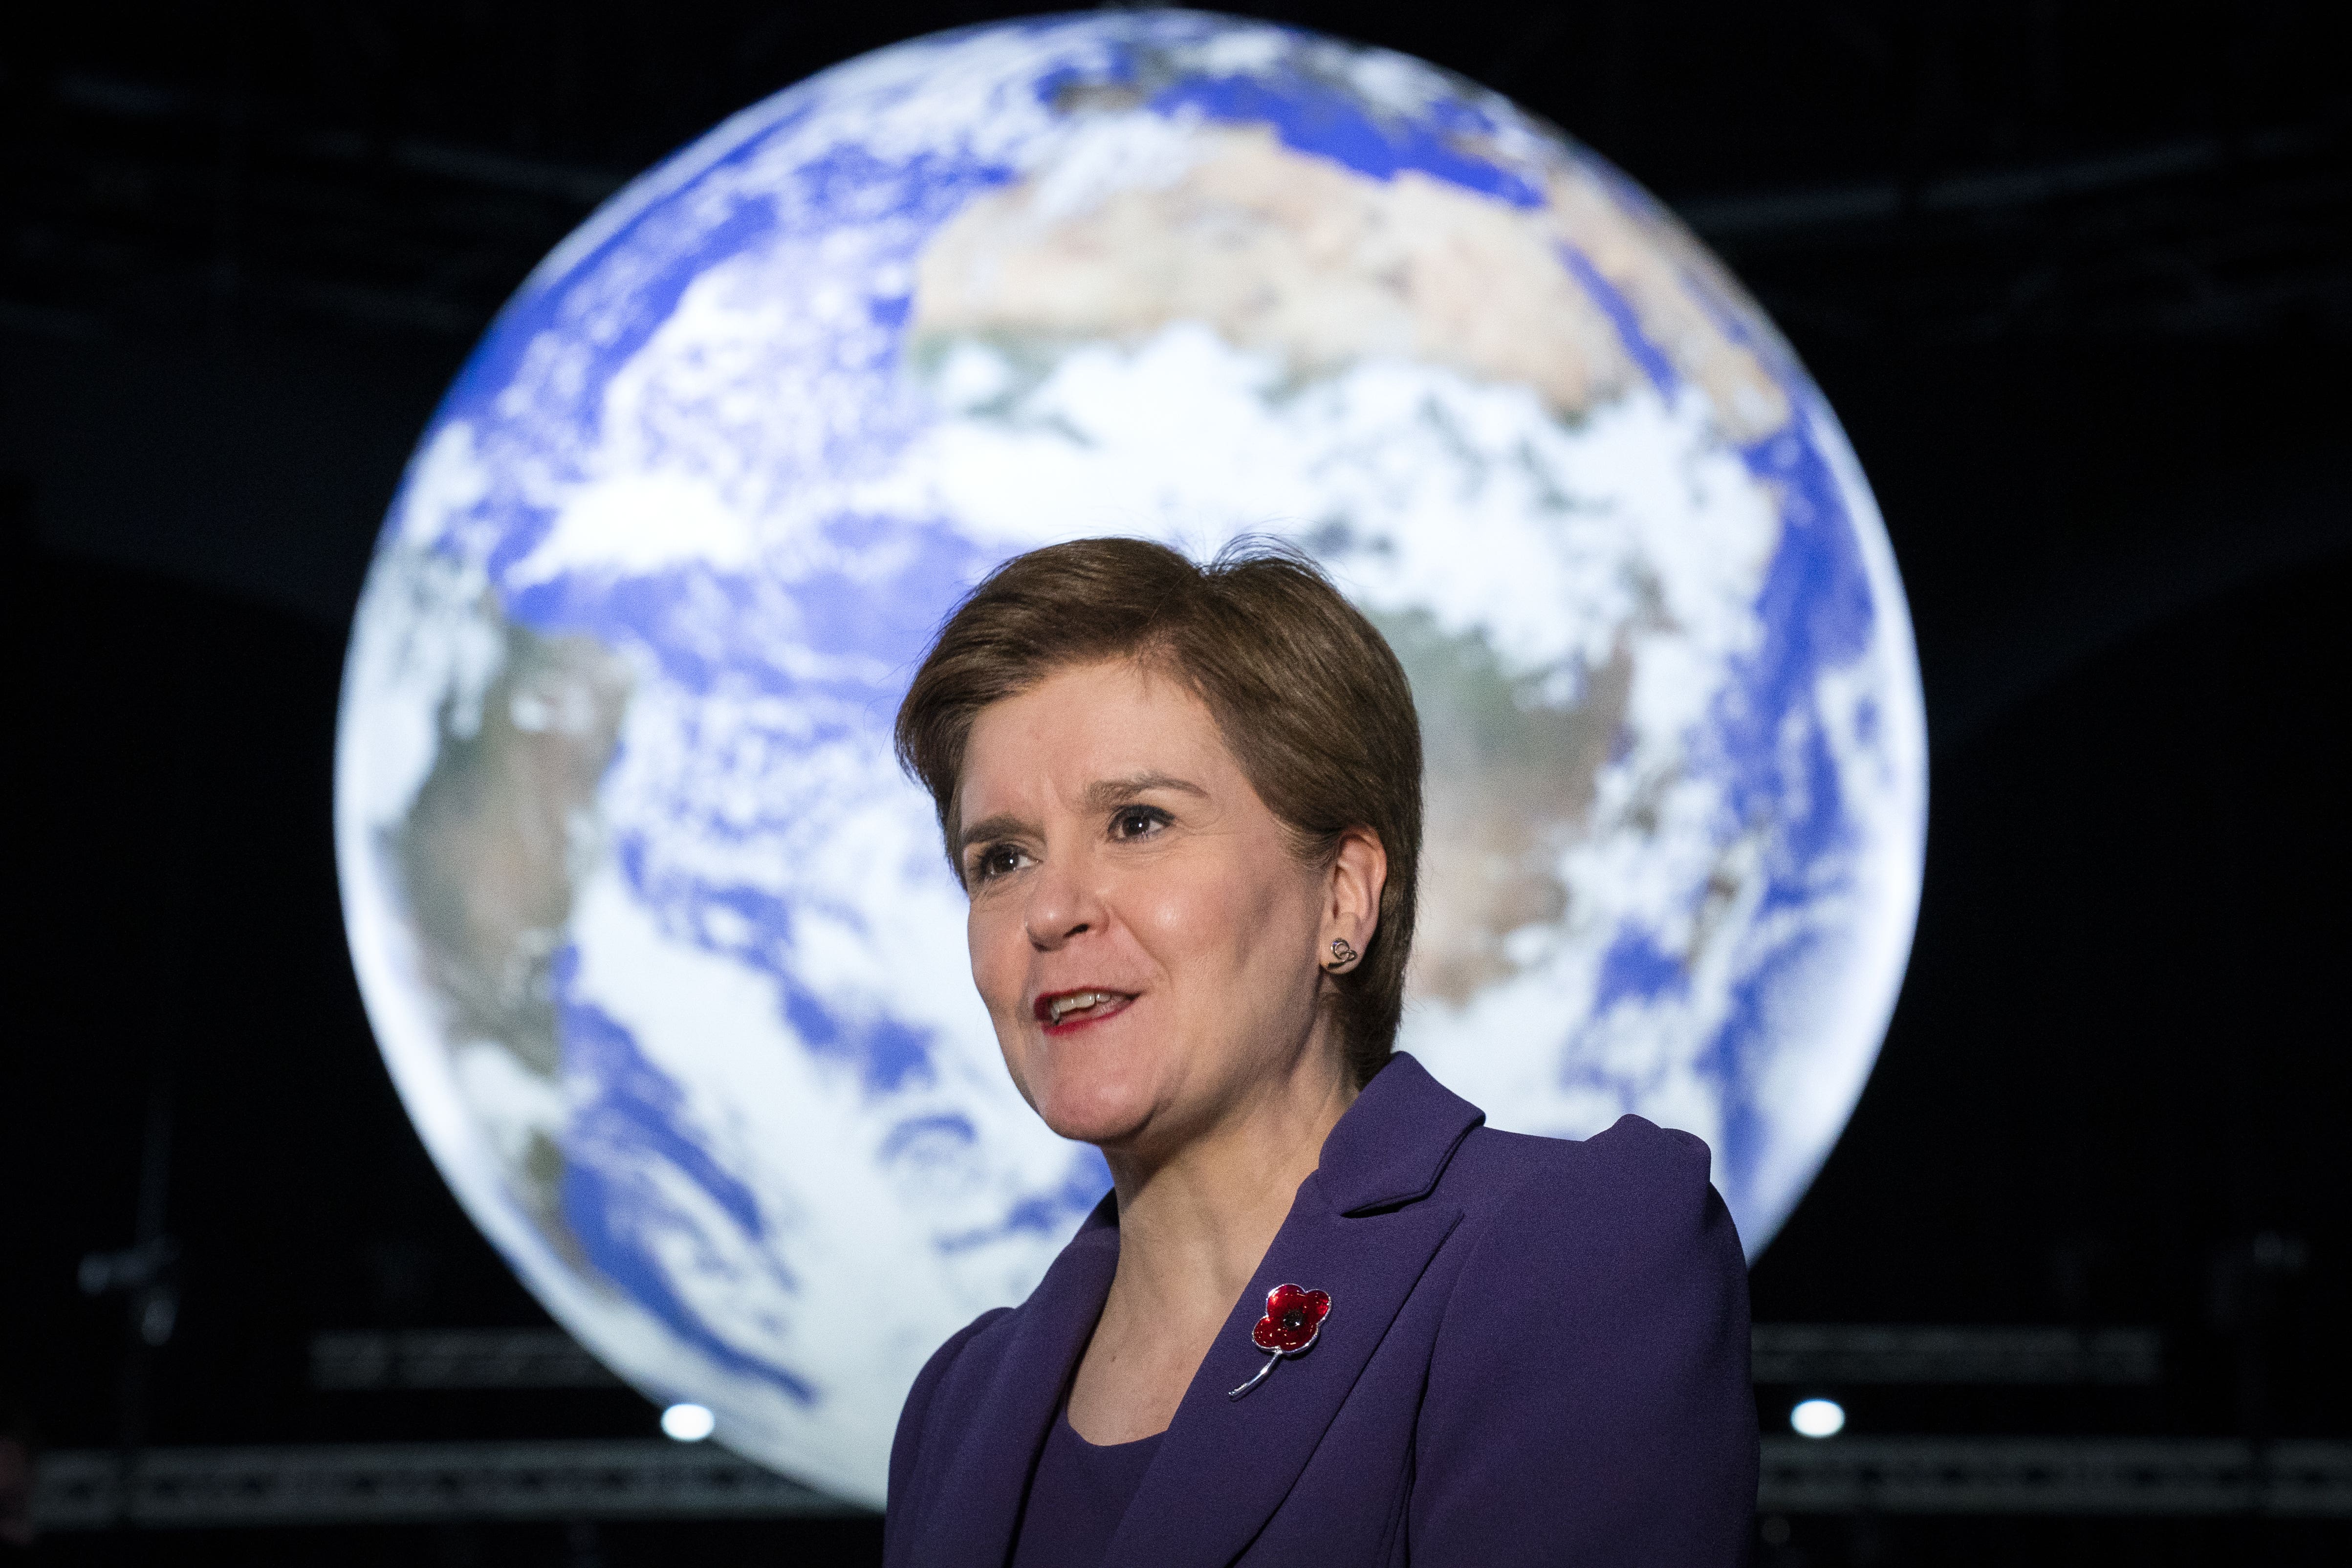 Nicola Sturgeon says there is still much work to do on climate change (Jane Barlow/PA)